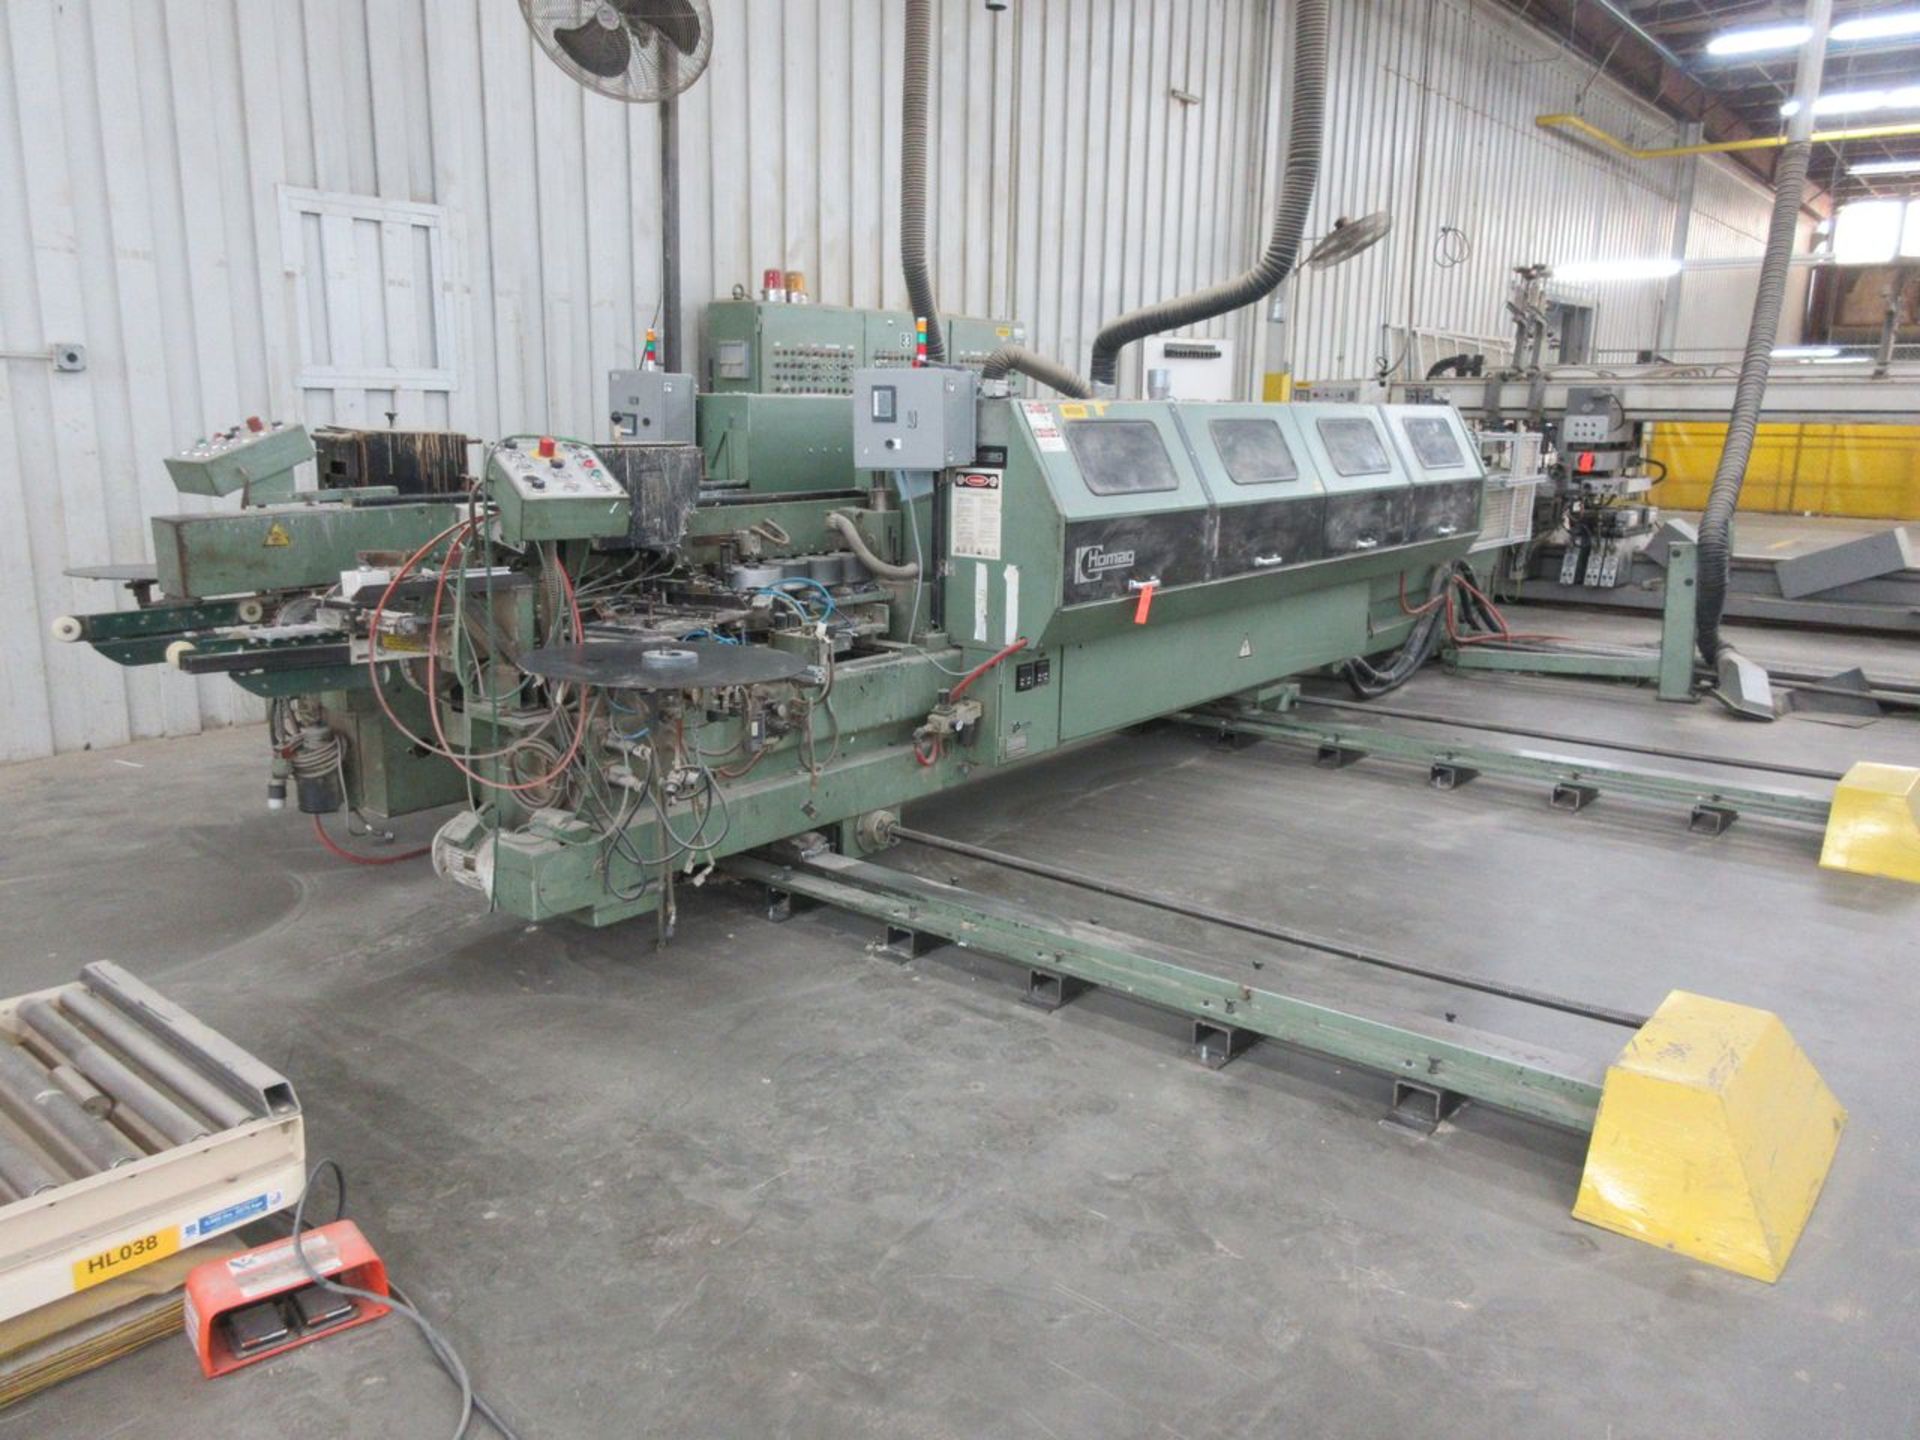 Homag Type KL87/A/30 Double End Edge Bander, S/N: 0-200-08-0007 (1985); with Coil Feed Reel, Glue